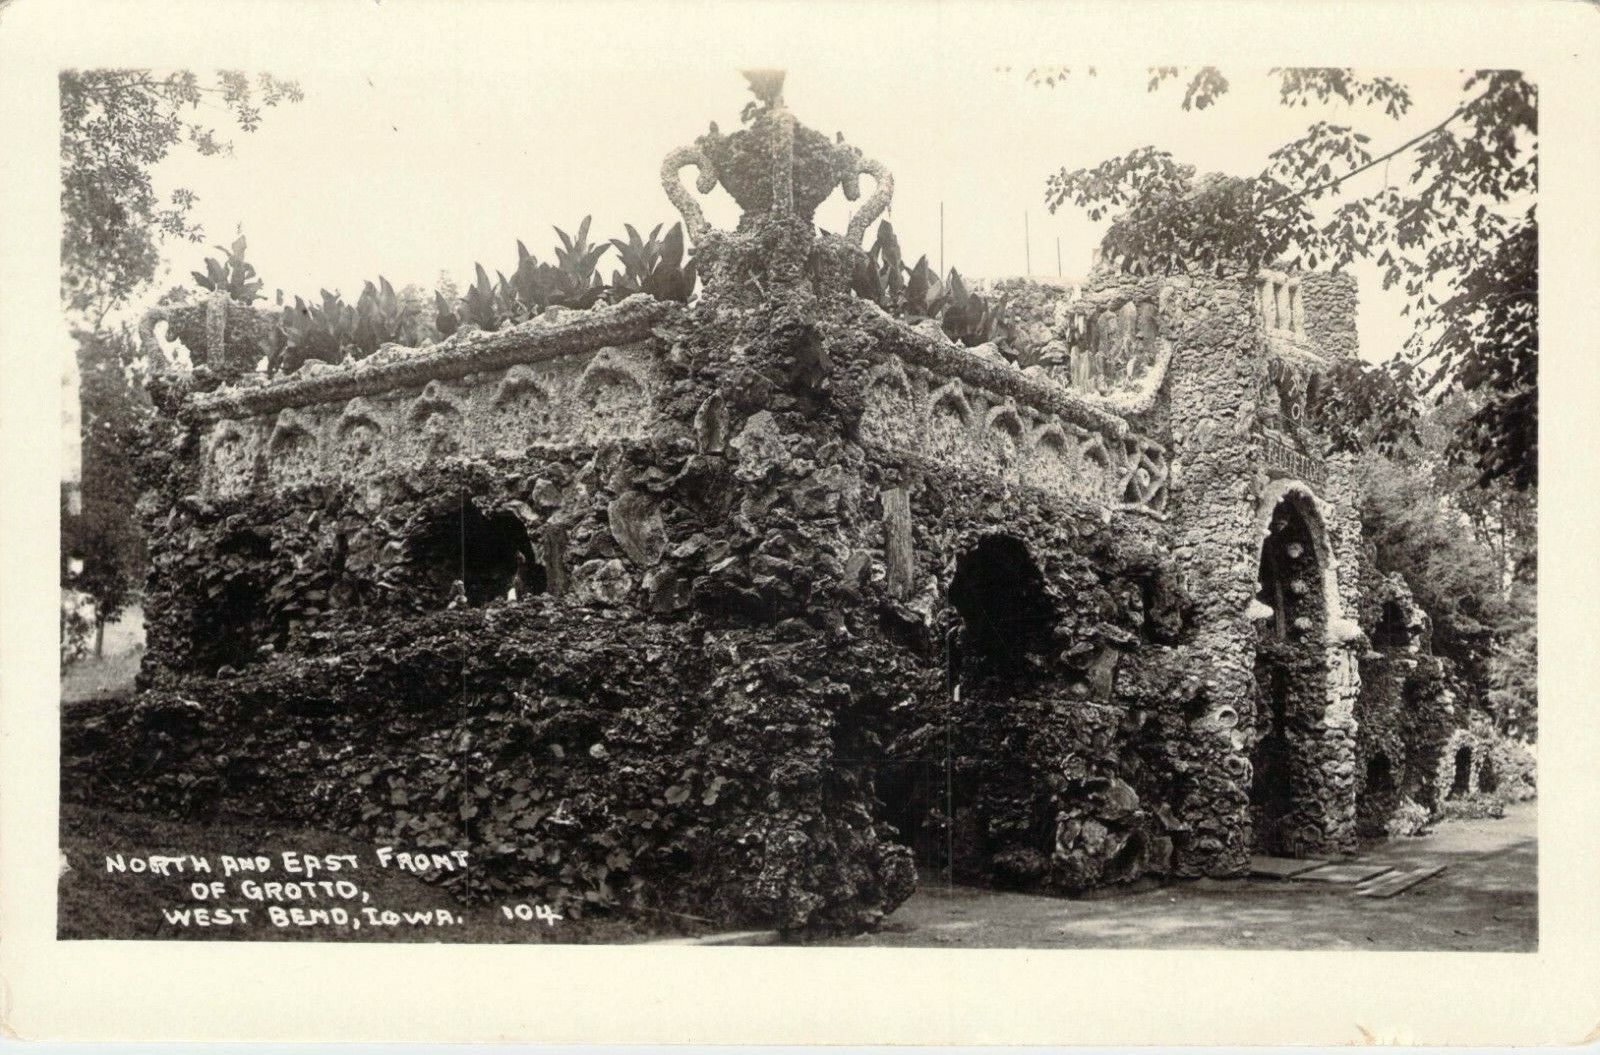 West Bend Iowa Grotto of the Redemption - 104 North & East Front - CPCC -RPPC